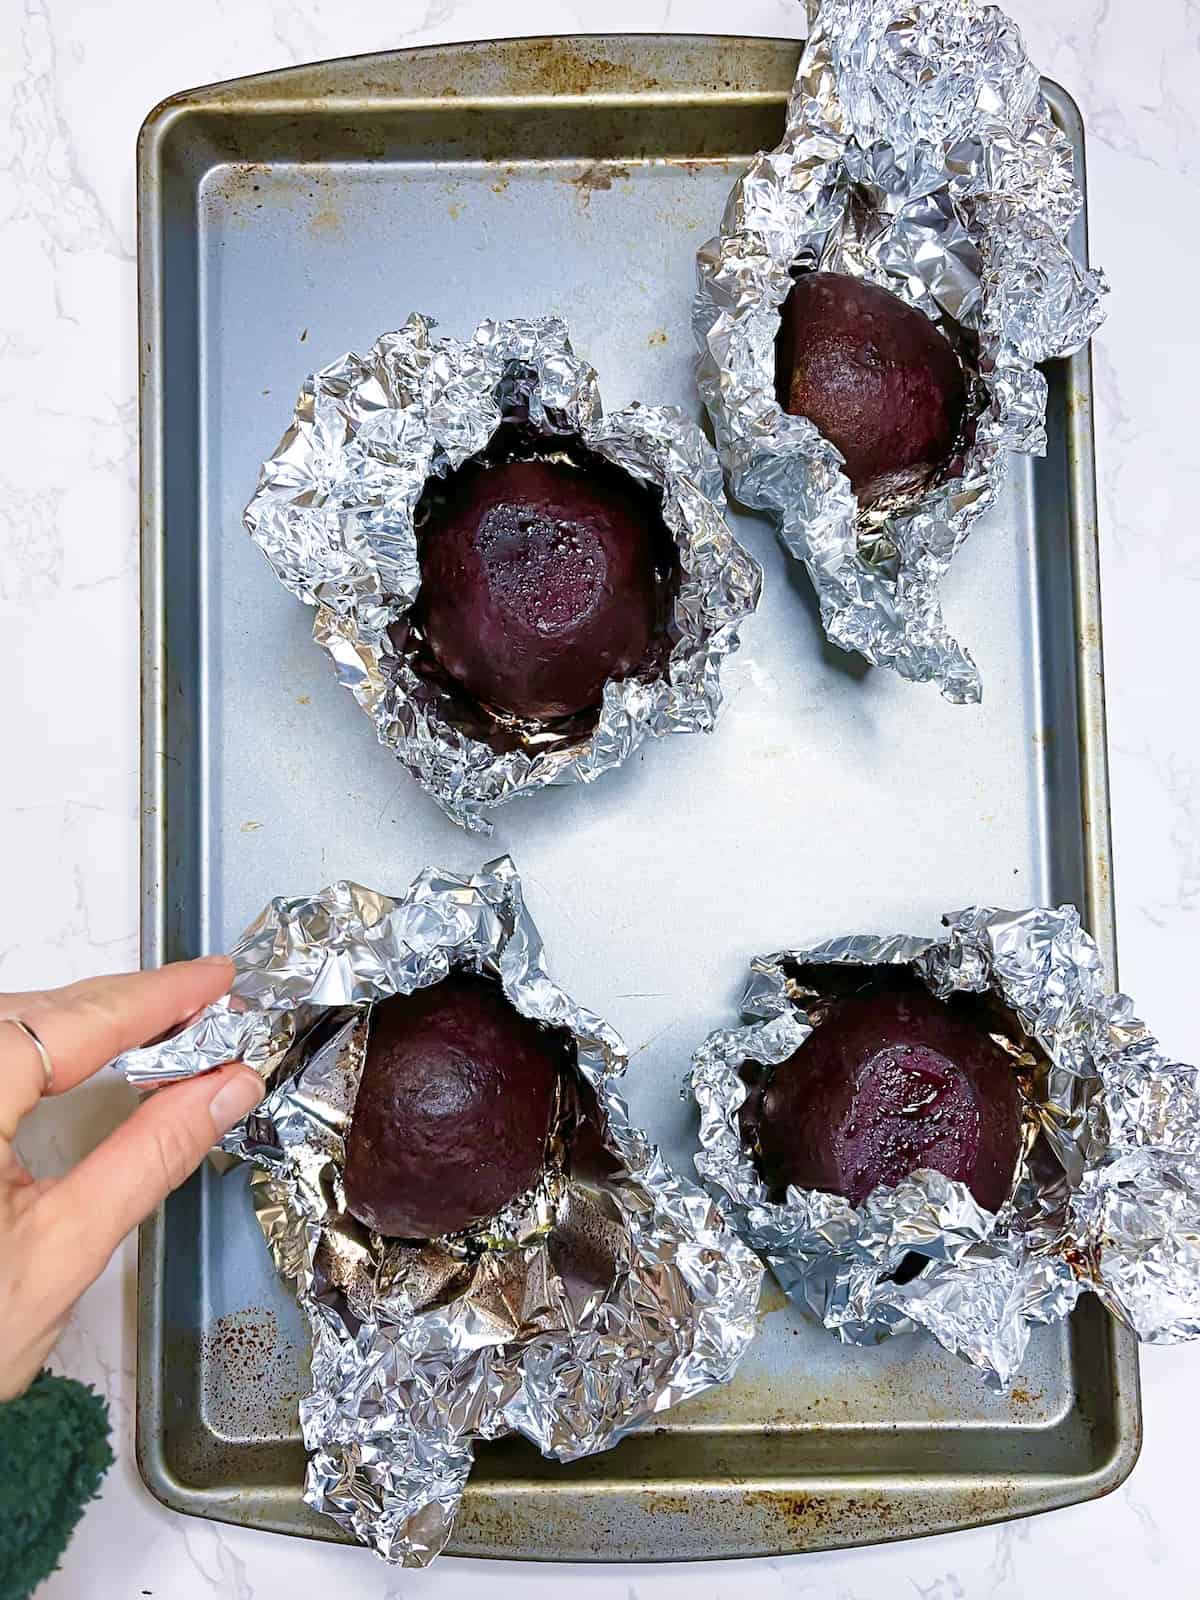 roasted beets in foil on a baking sheet with a hand holding one foil packet opened